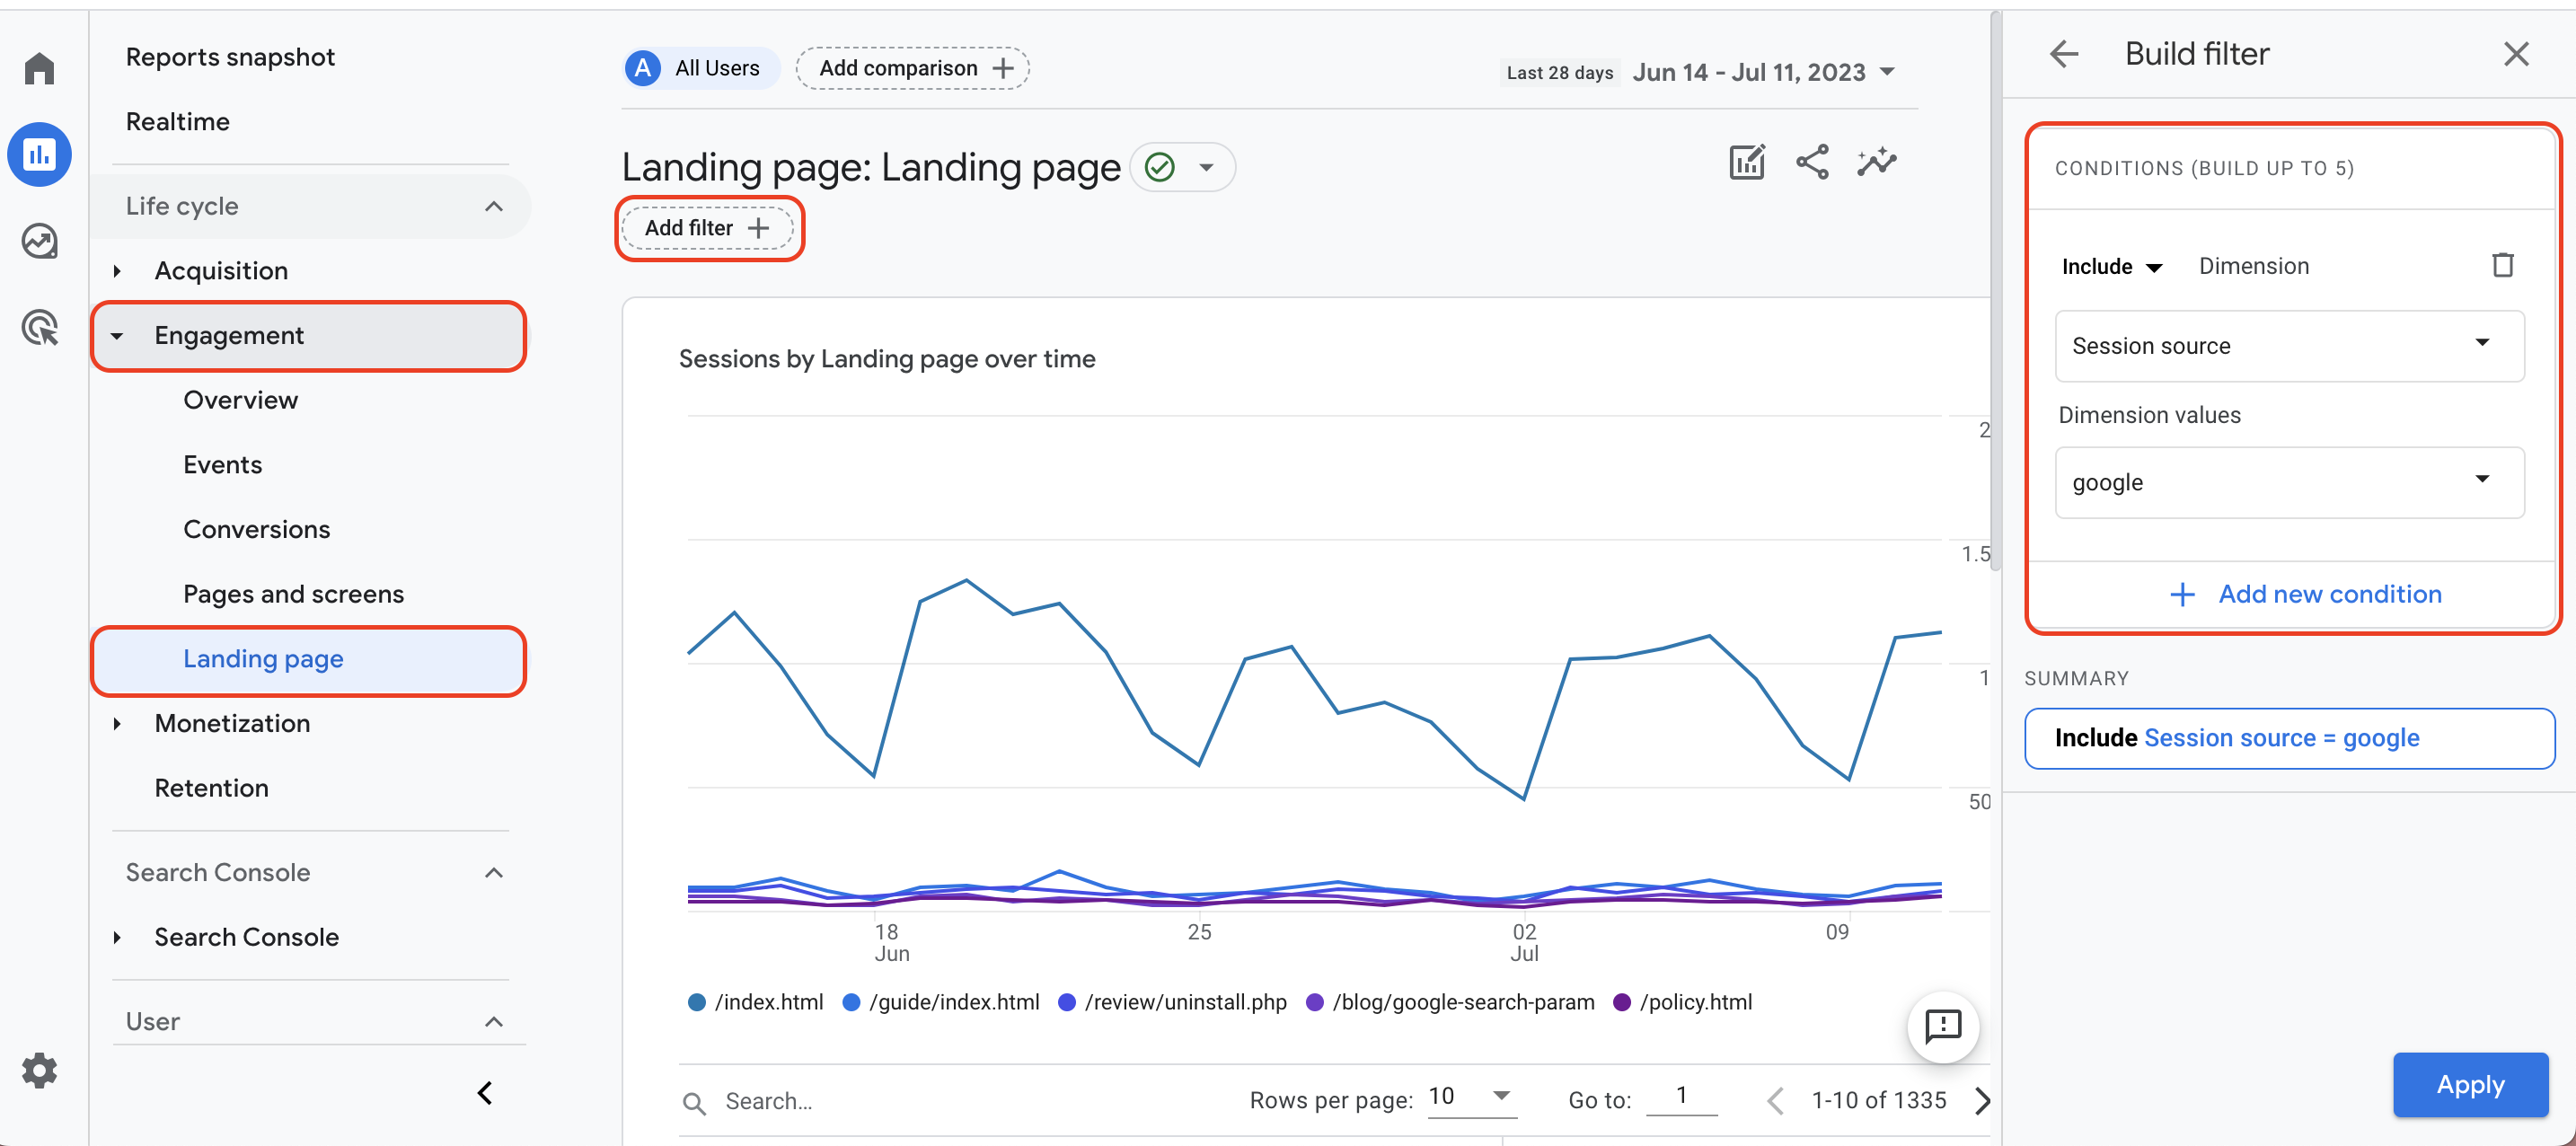 An example of a Landing page report in Google Analytics 4 with red rectangles highlighting Engagement and Landing page in the left-hand menu and the Add filter button at the top of the report. On the right side, the Build filter menu is also highlighted with a red rectangle. 